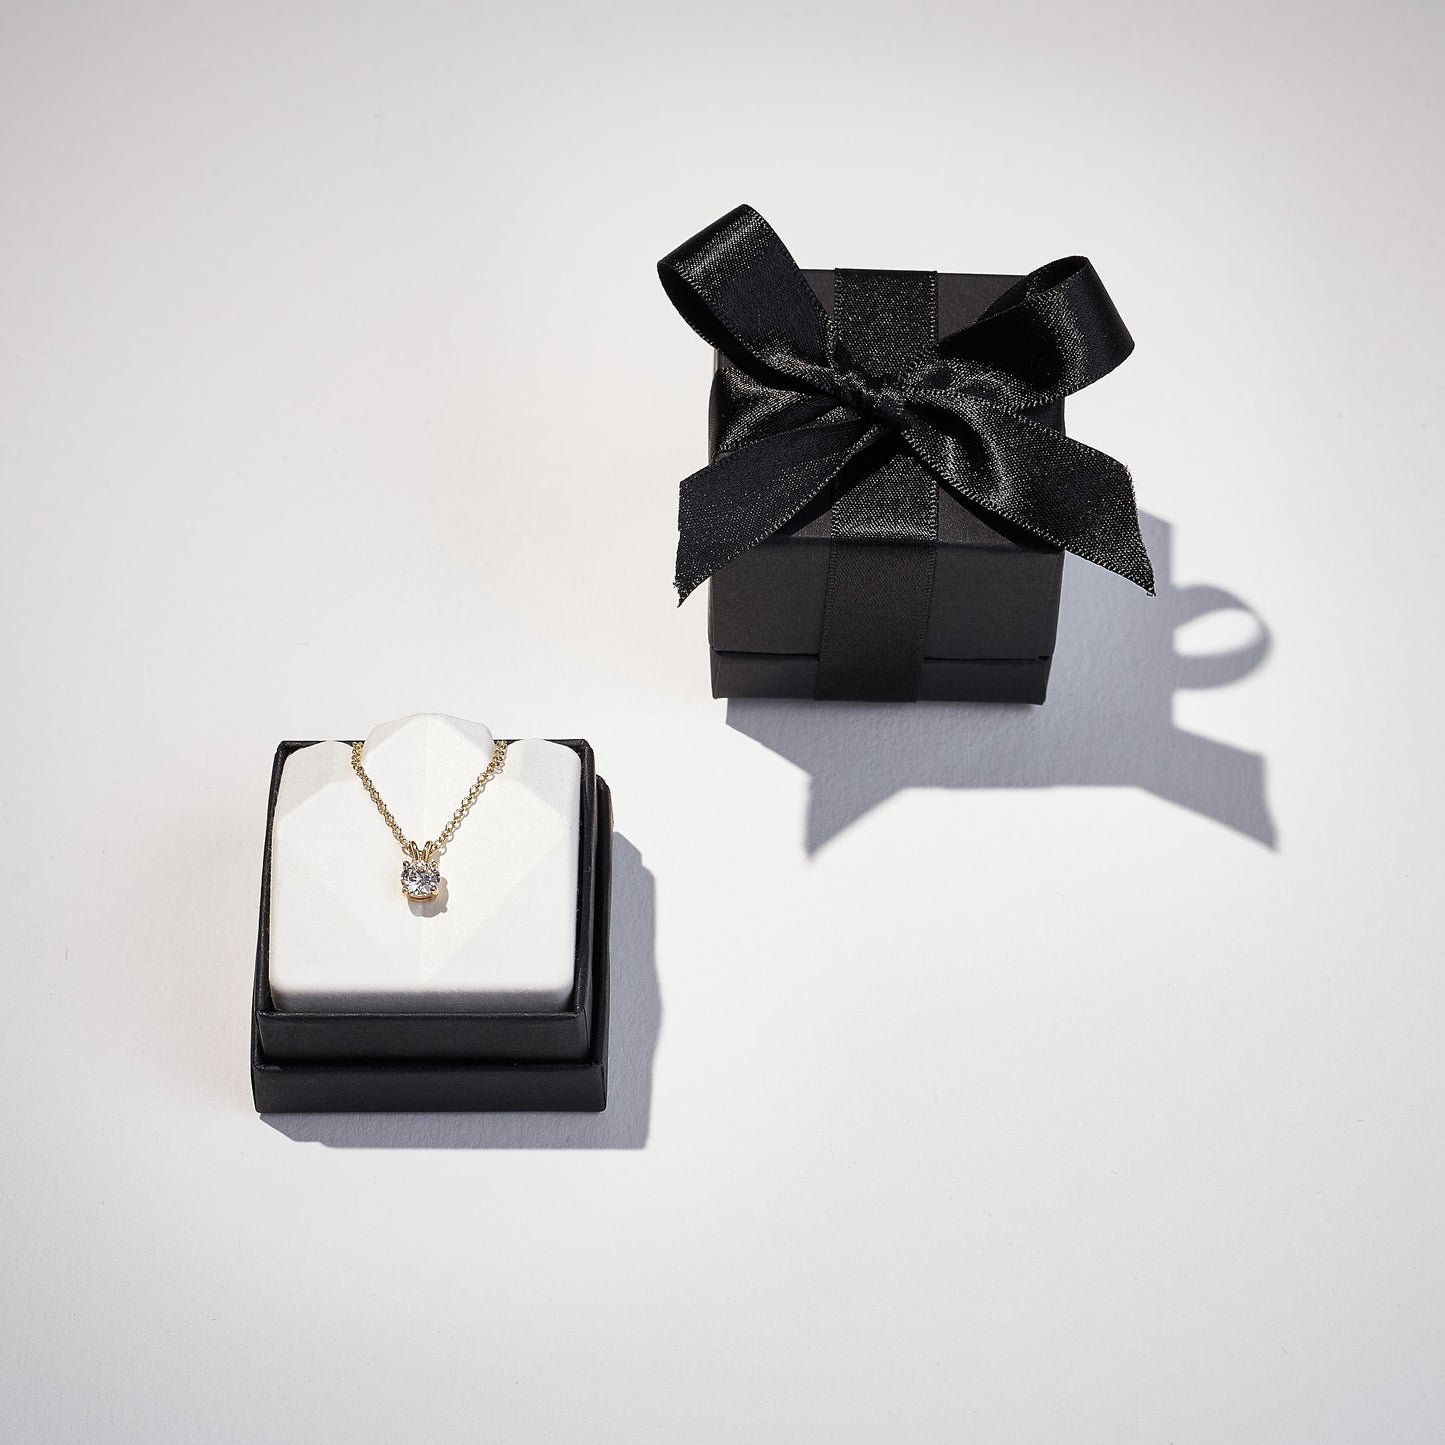 Modern 1.1ct Pendant in 18ct White Gold